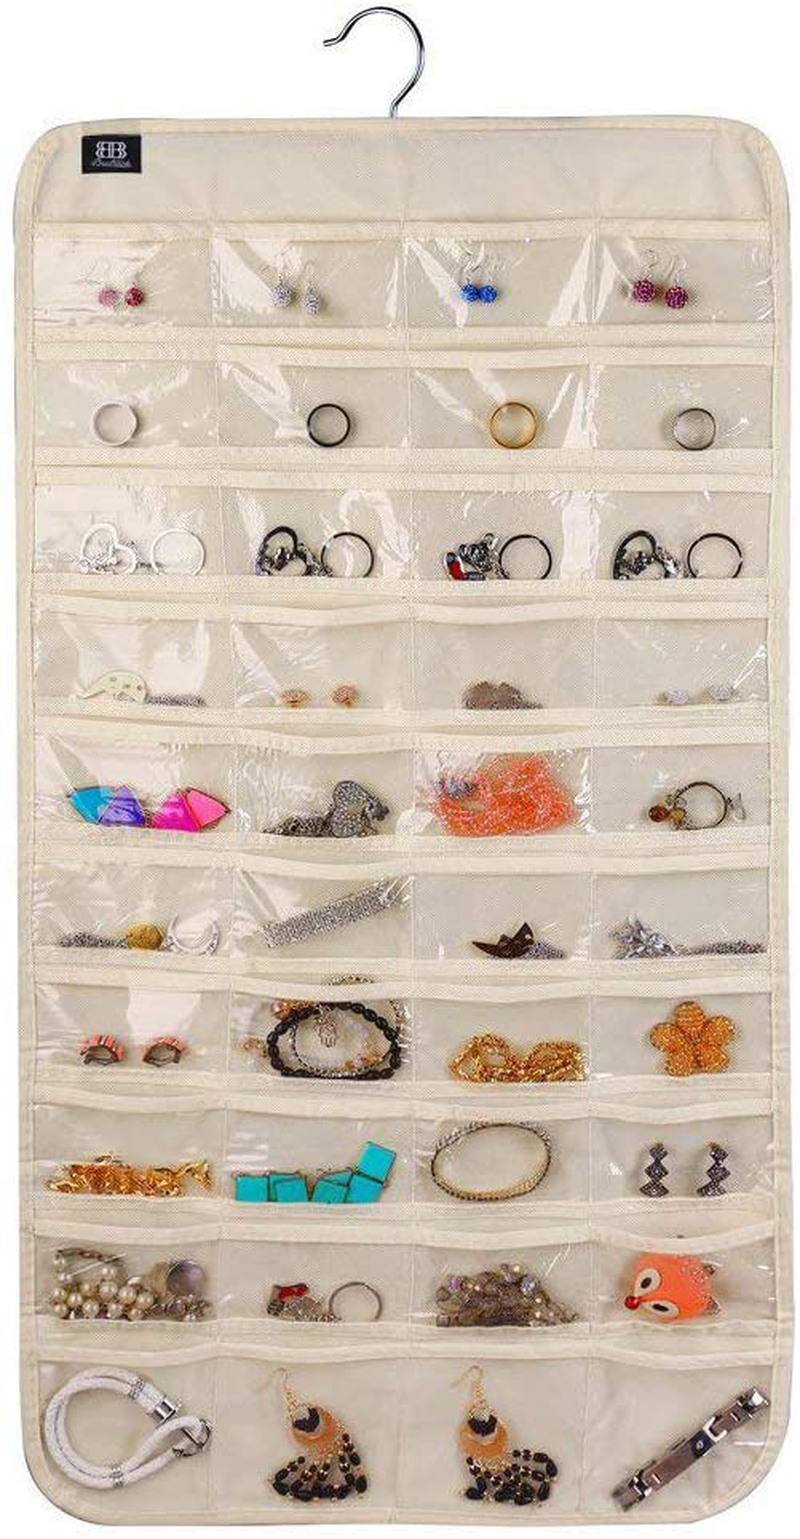 BB Brotrade Hanging Jewelry Organizer,Double Sided 56 Pockets&9 Hooks Accessories Organizer for Holding Jewelry(Beige-56 Pockets)